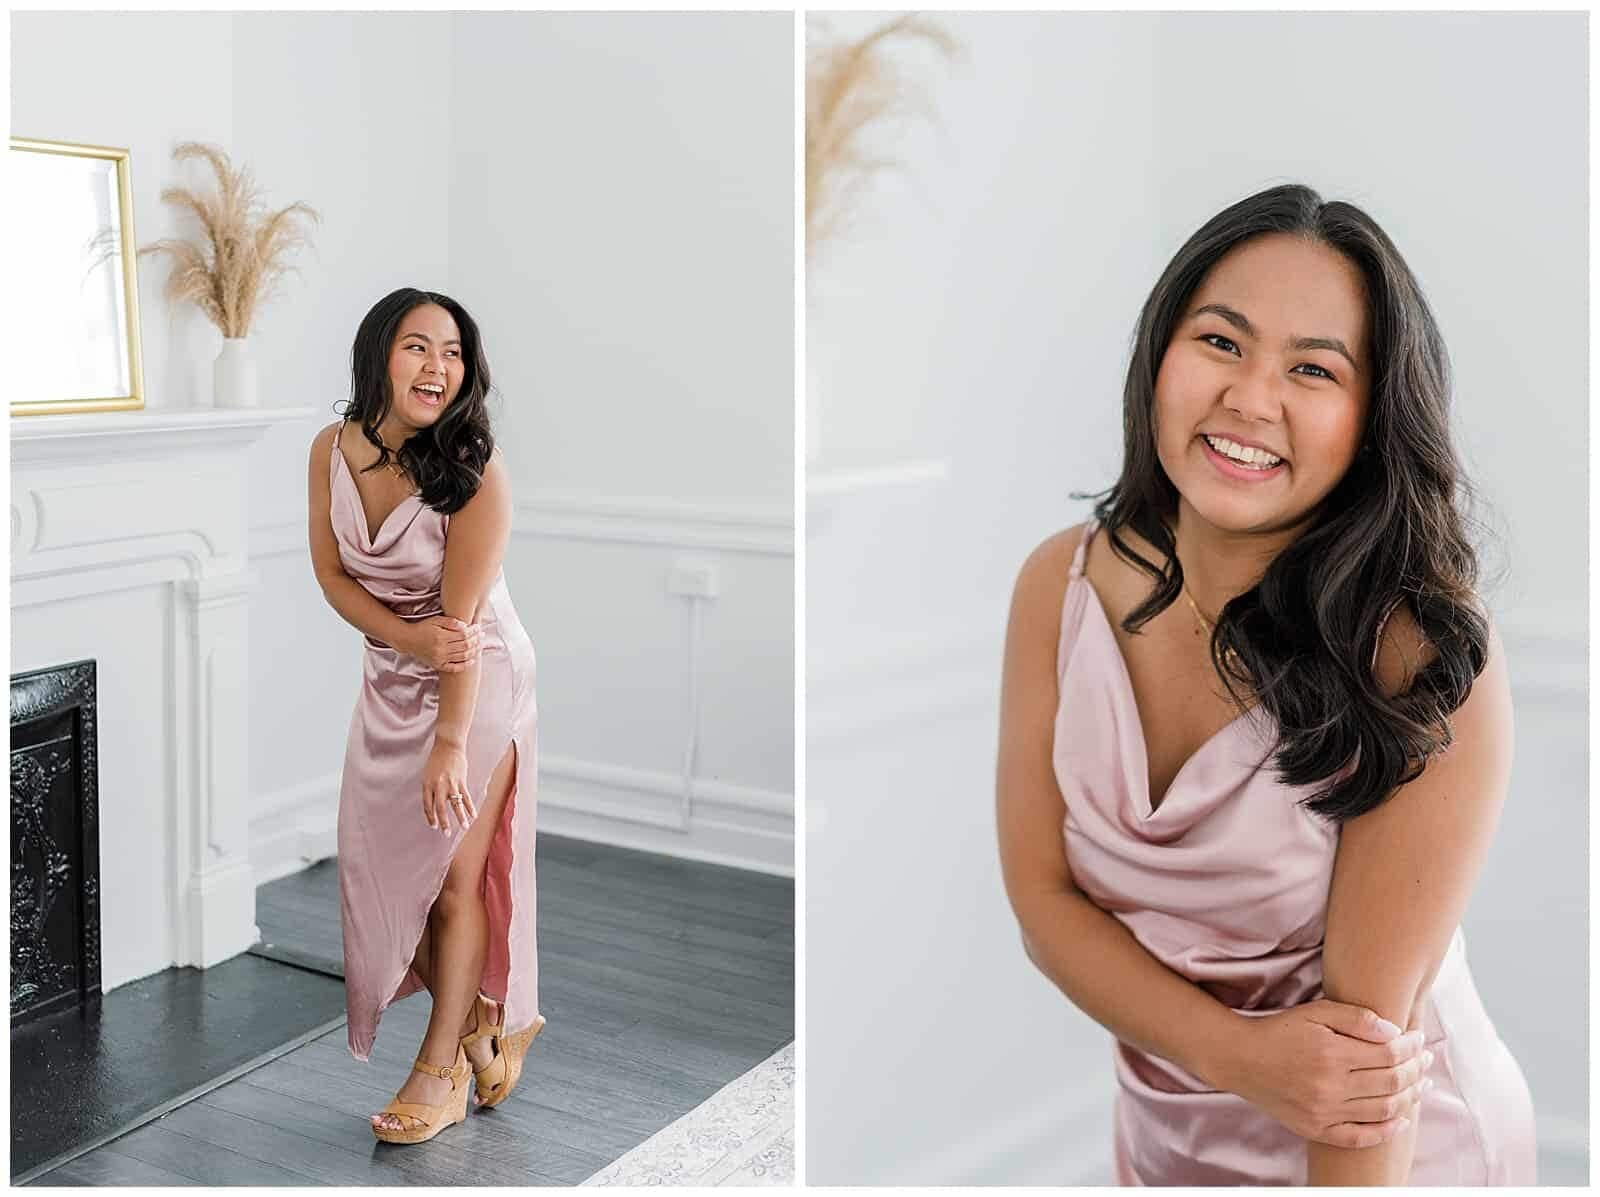 Collage of highlight images of wedding photographer's brand photoshoot in staunton virginia photography studio. Photographer is a young Asian woman wearing a pink silk dress, standing by early 1900s mantel decorated with light brown, fluffy boho styled plants. She is laughing and smiling.